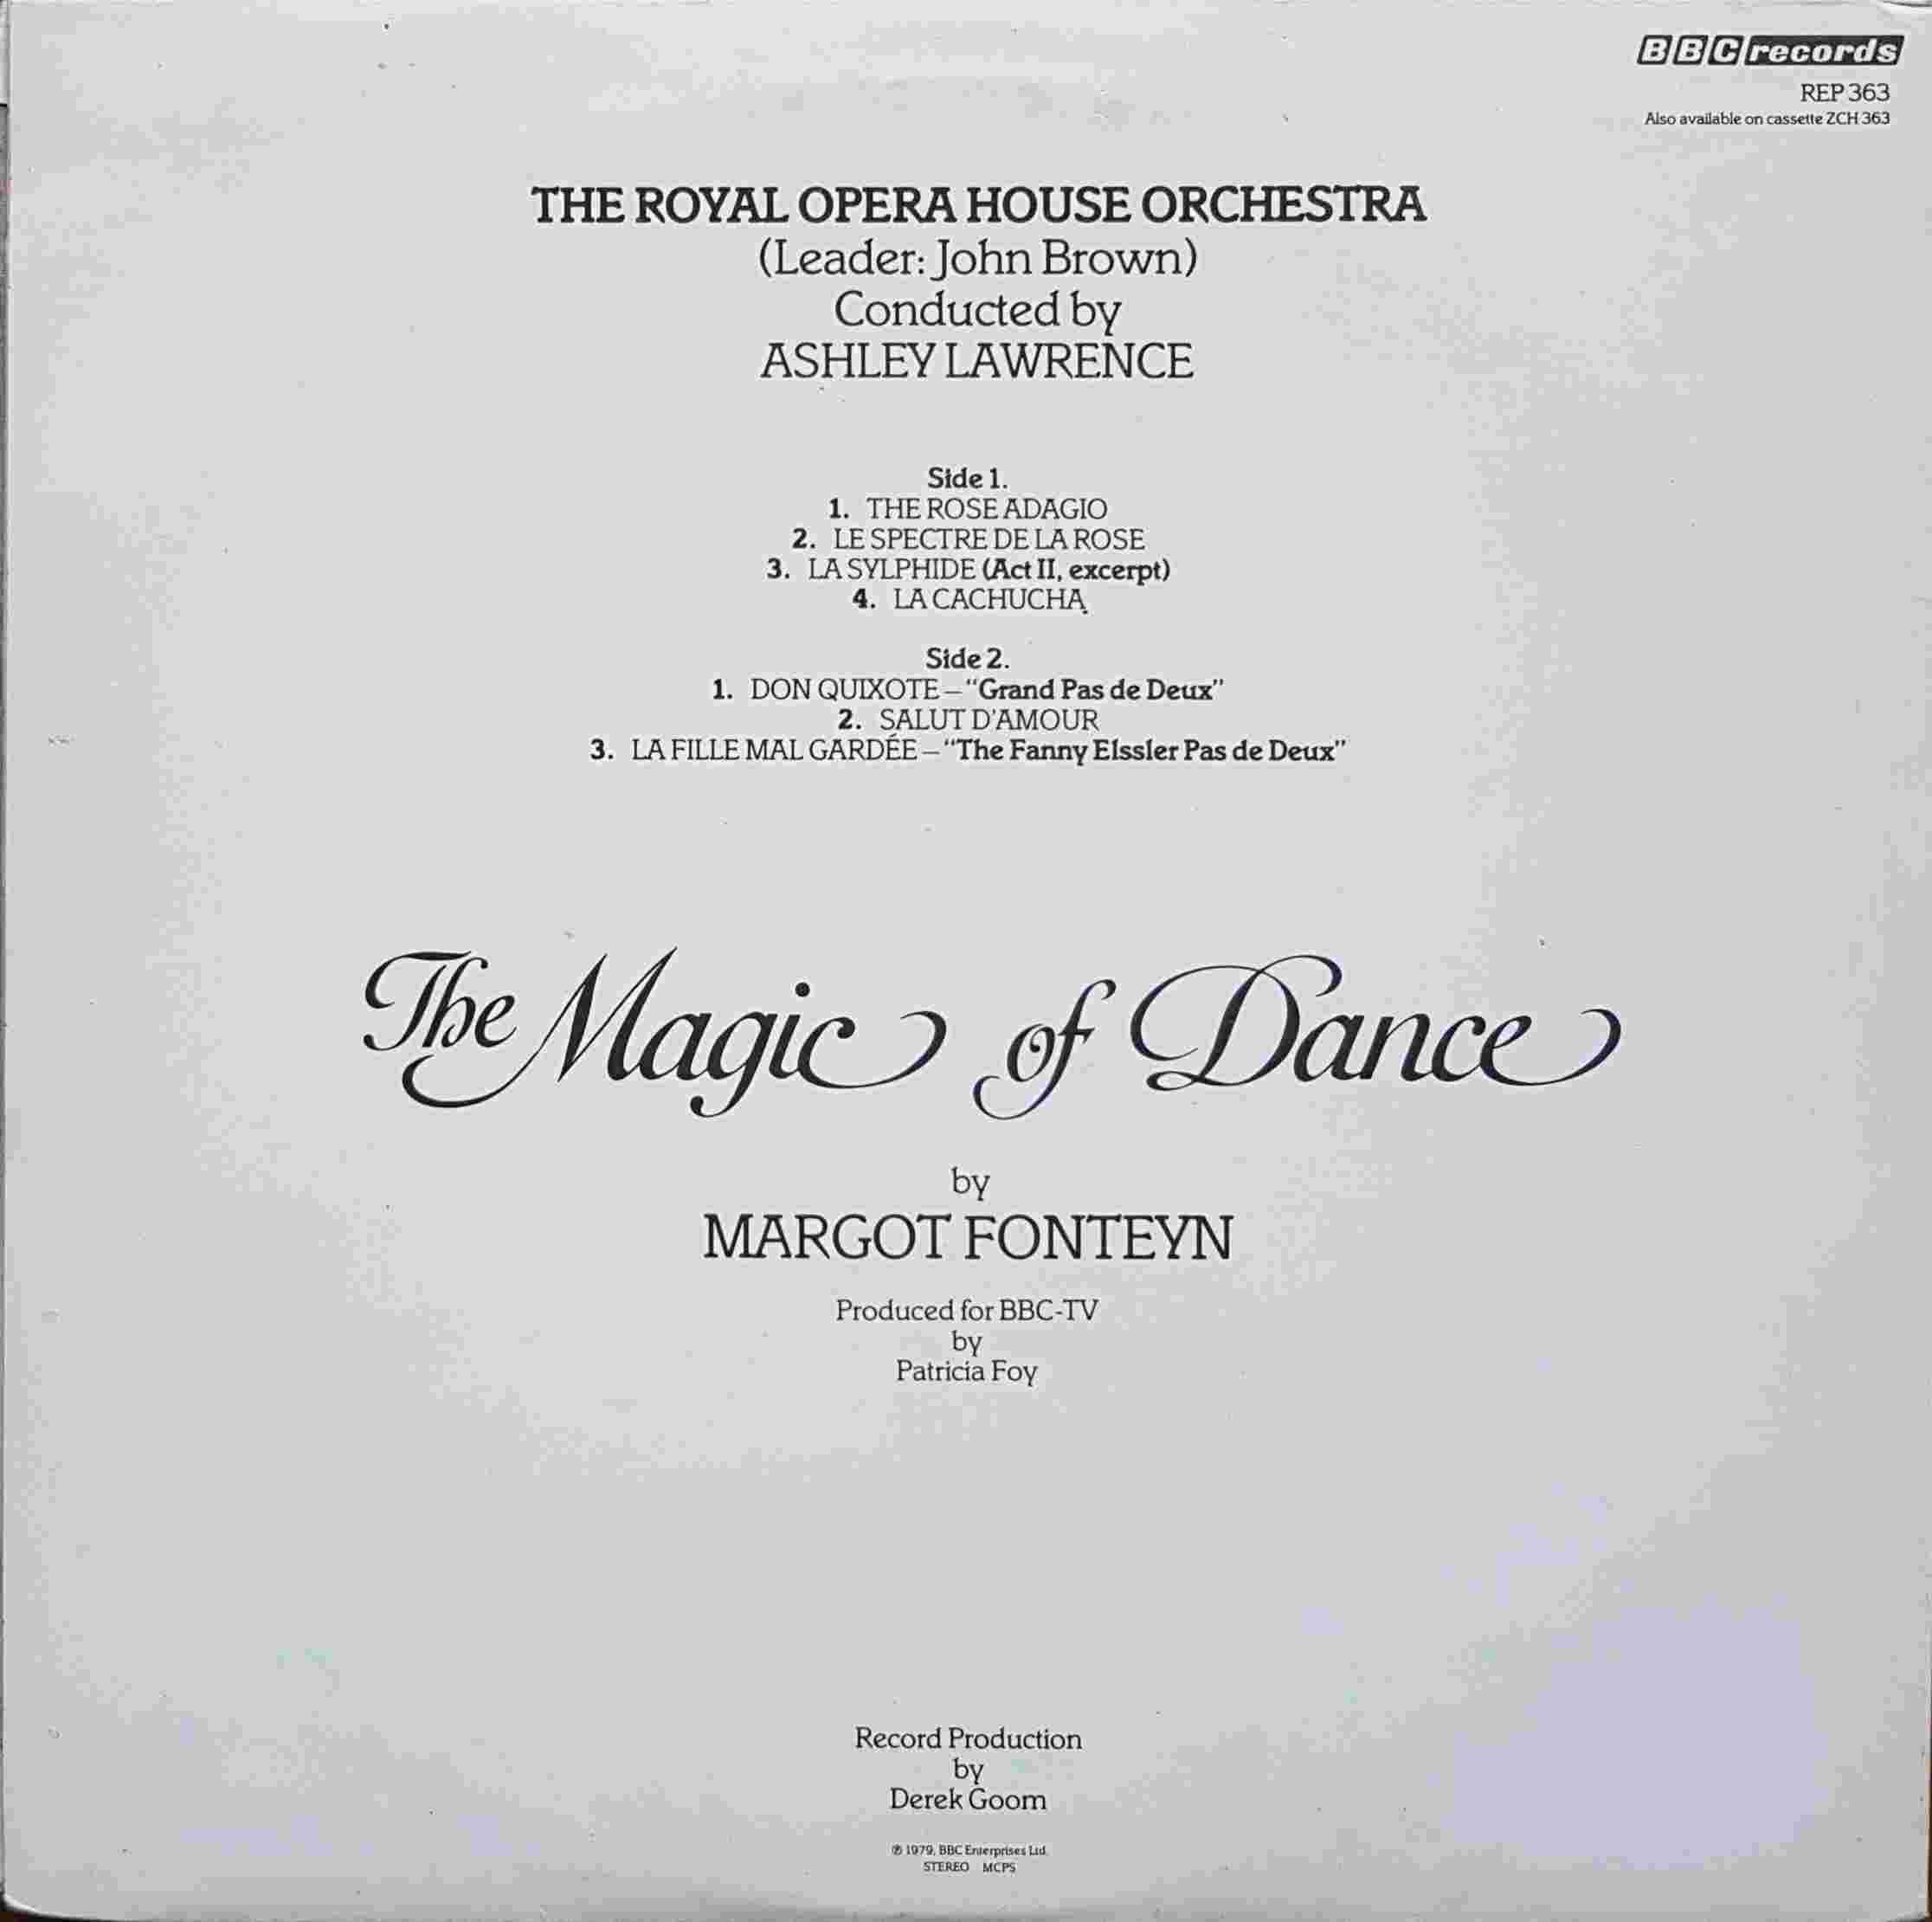 Picture of REP 363 The magic of dance by artist Margot Fonteyn from the BBC records and Tapes library